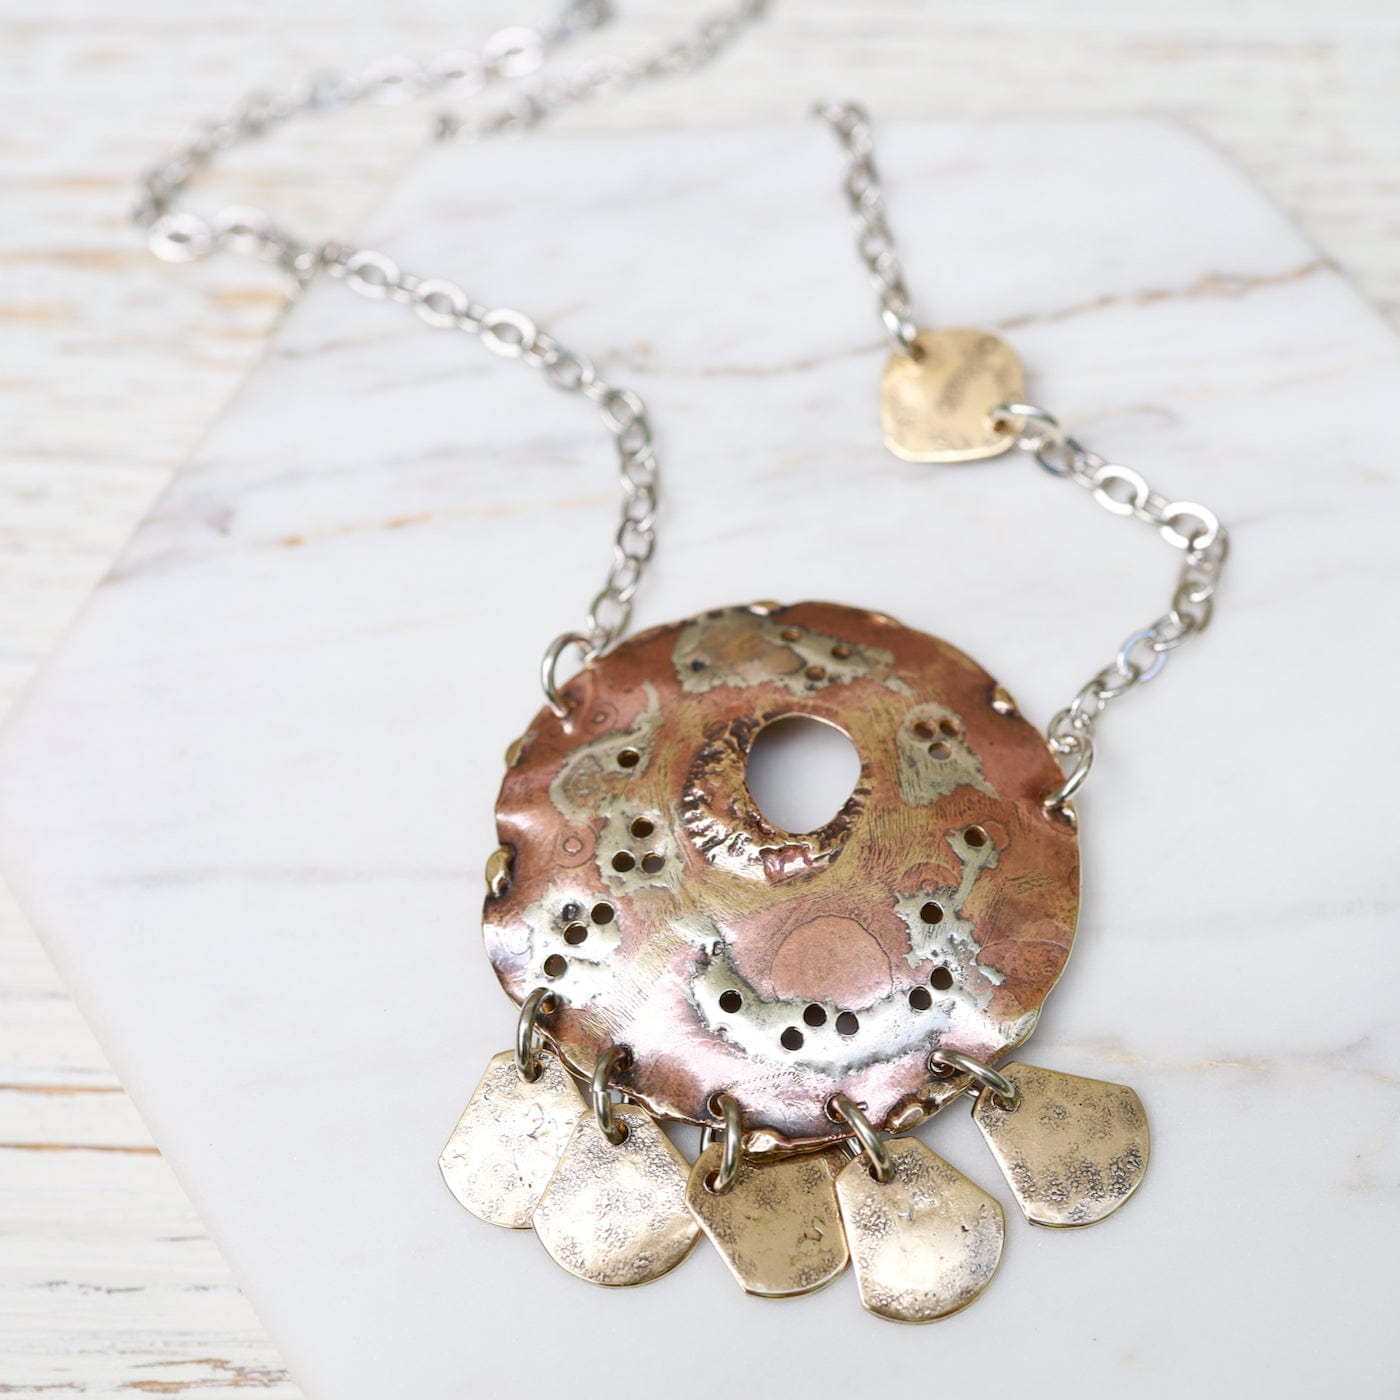 NKL Mixed Metal Medallion Necklace with Discs